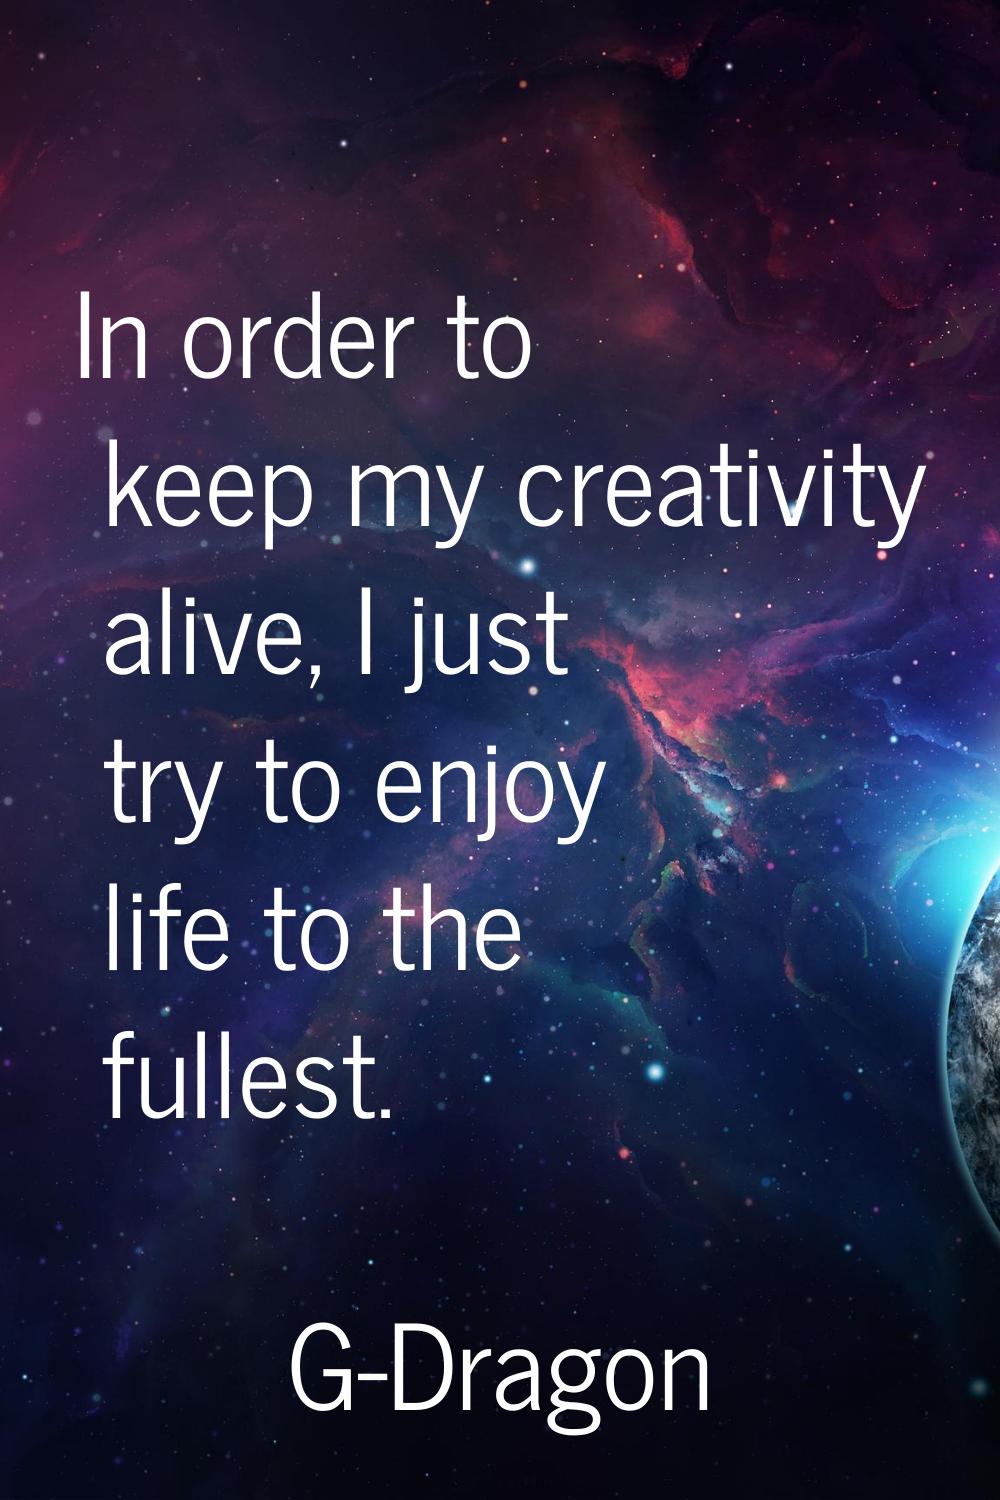 In order to keep my creativity alive, I just try to enjoy life to the fullest.